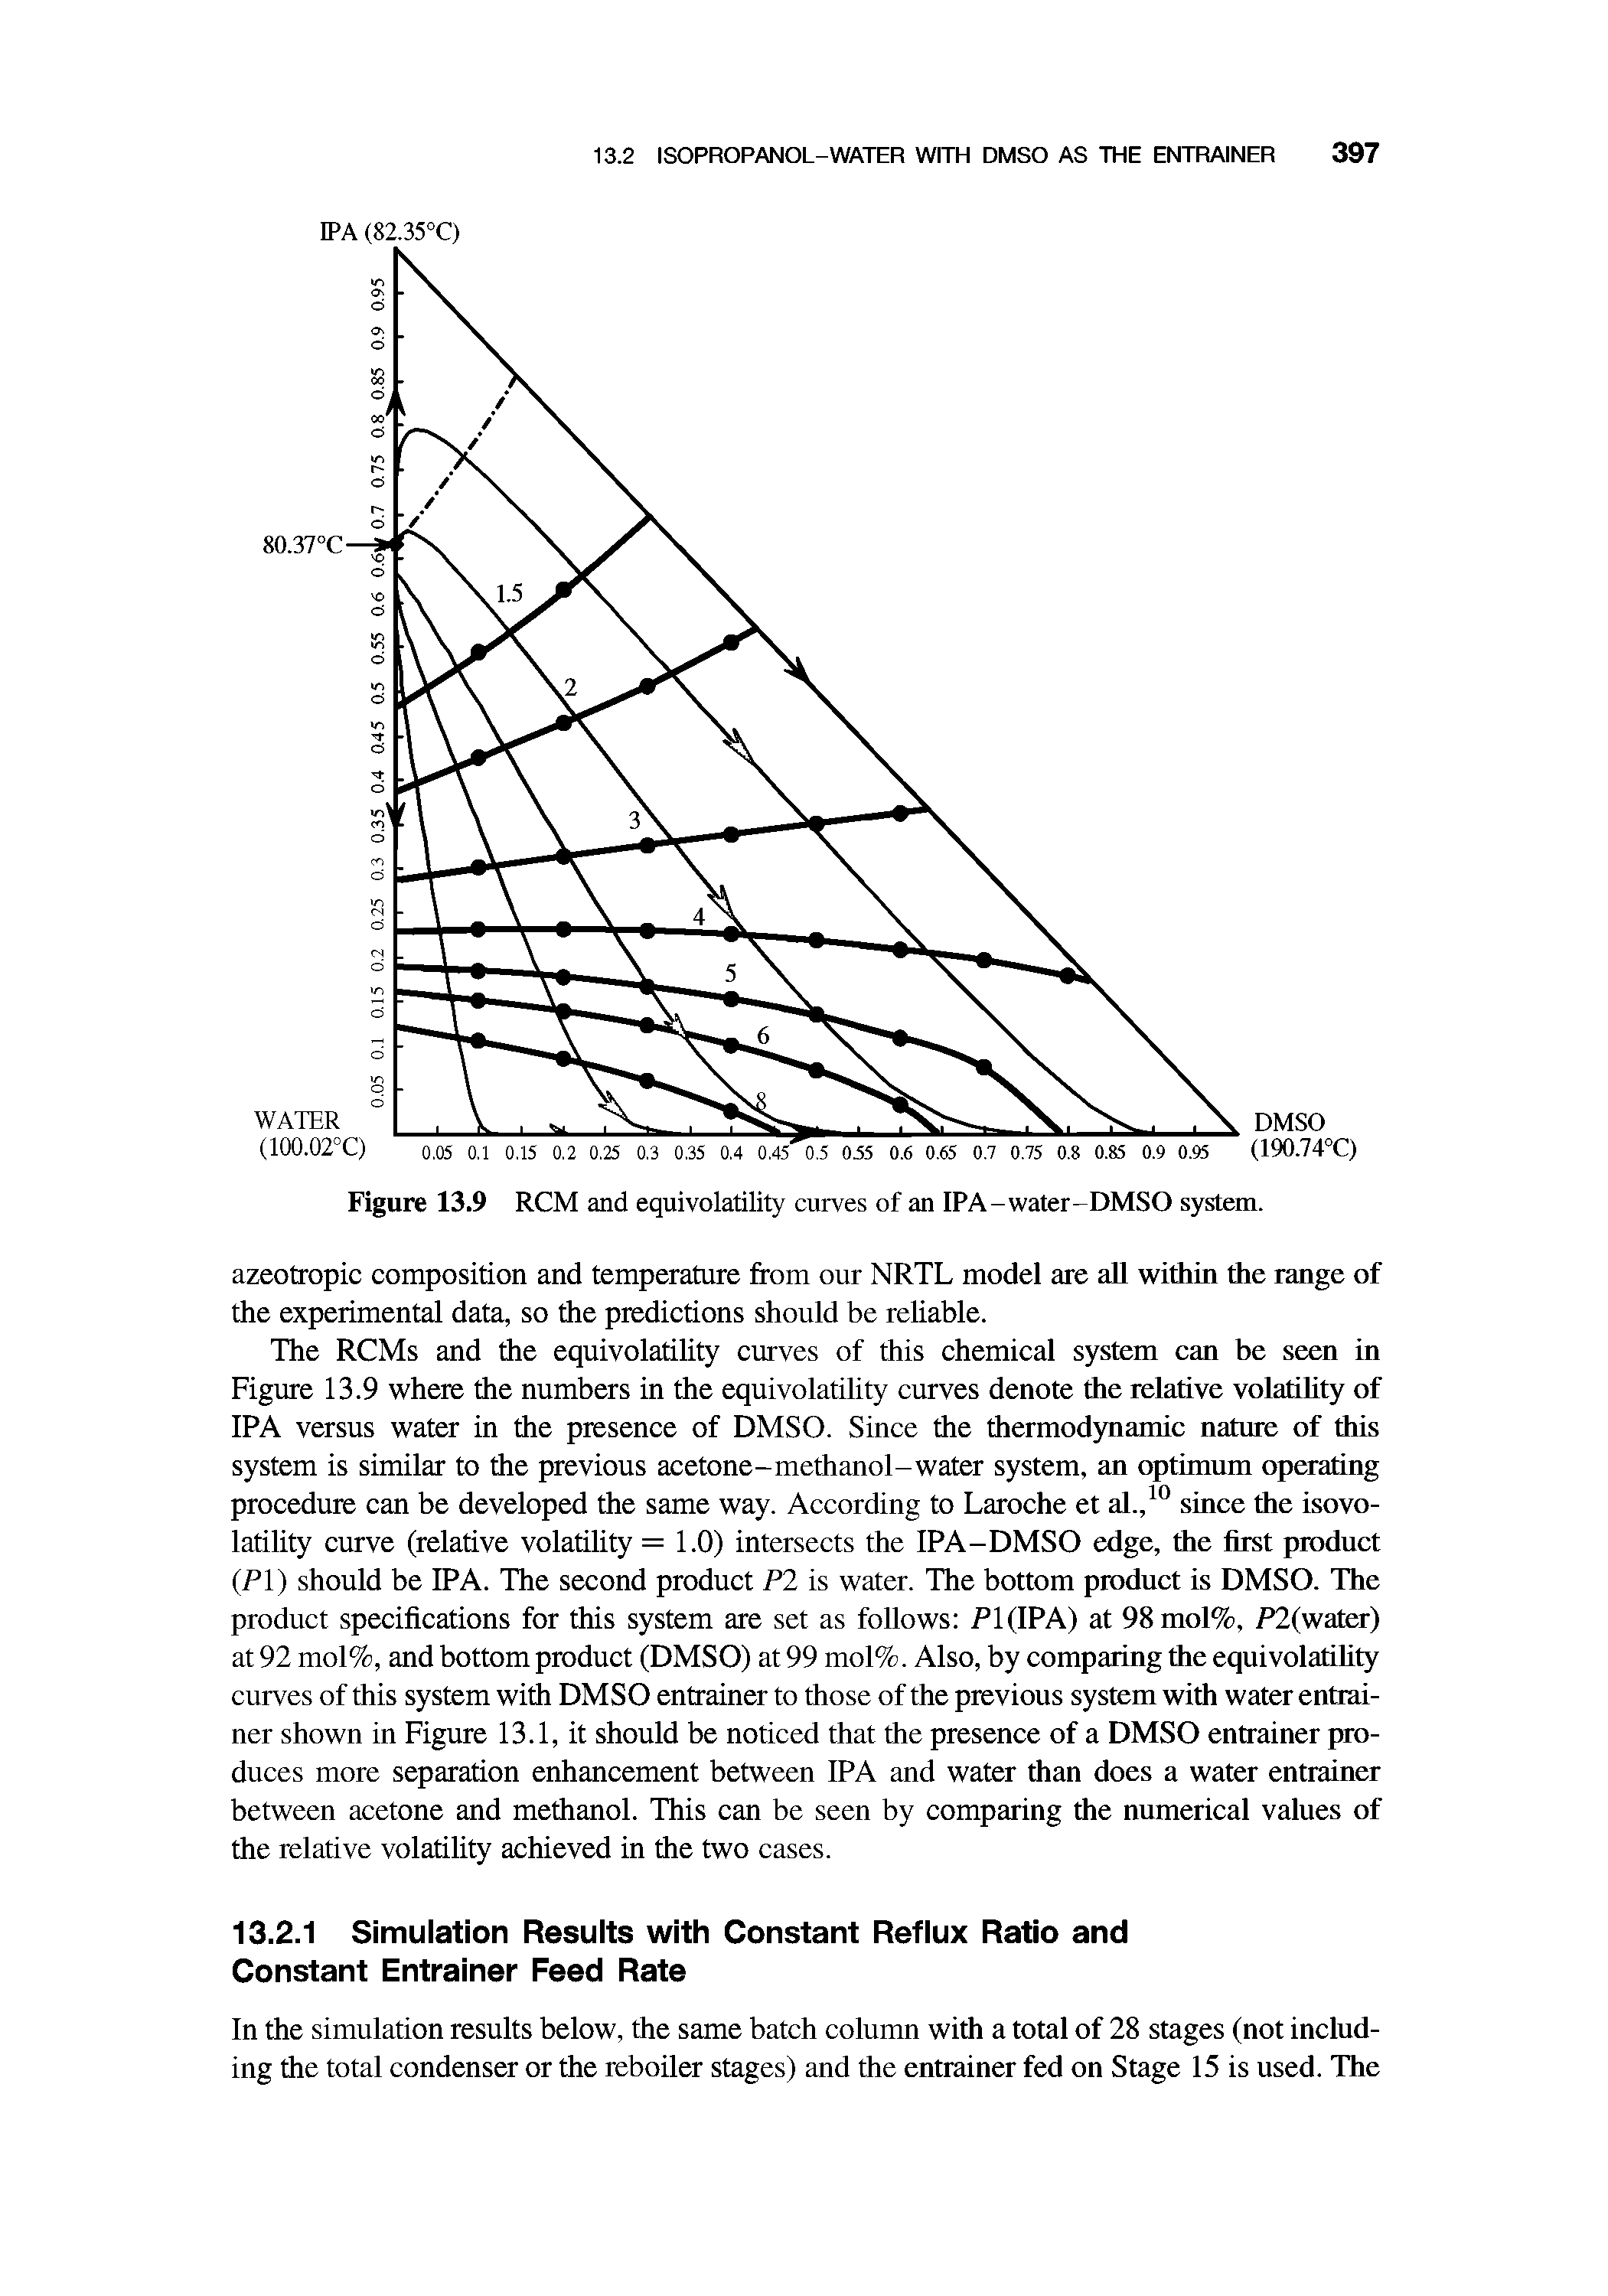 Figure 13.9 RCM and equivolatility curves of an IPA-water-DMSO system.